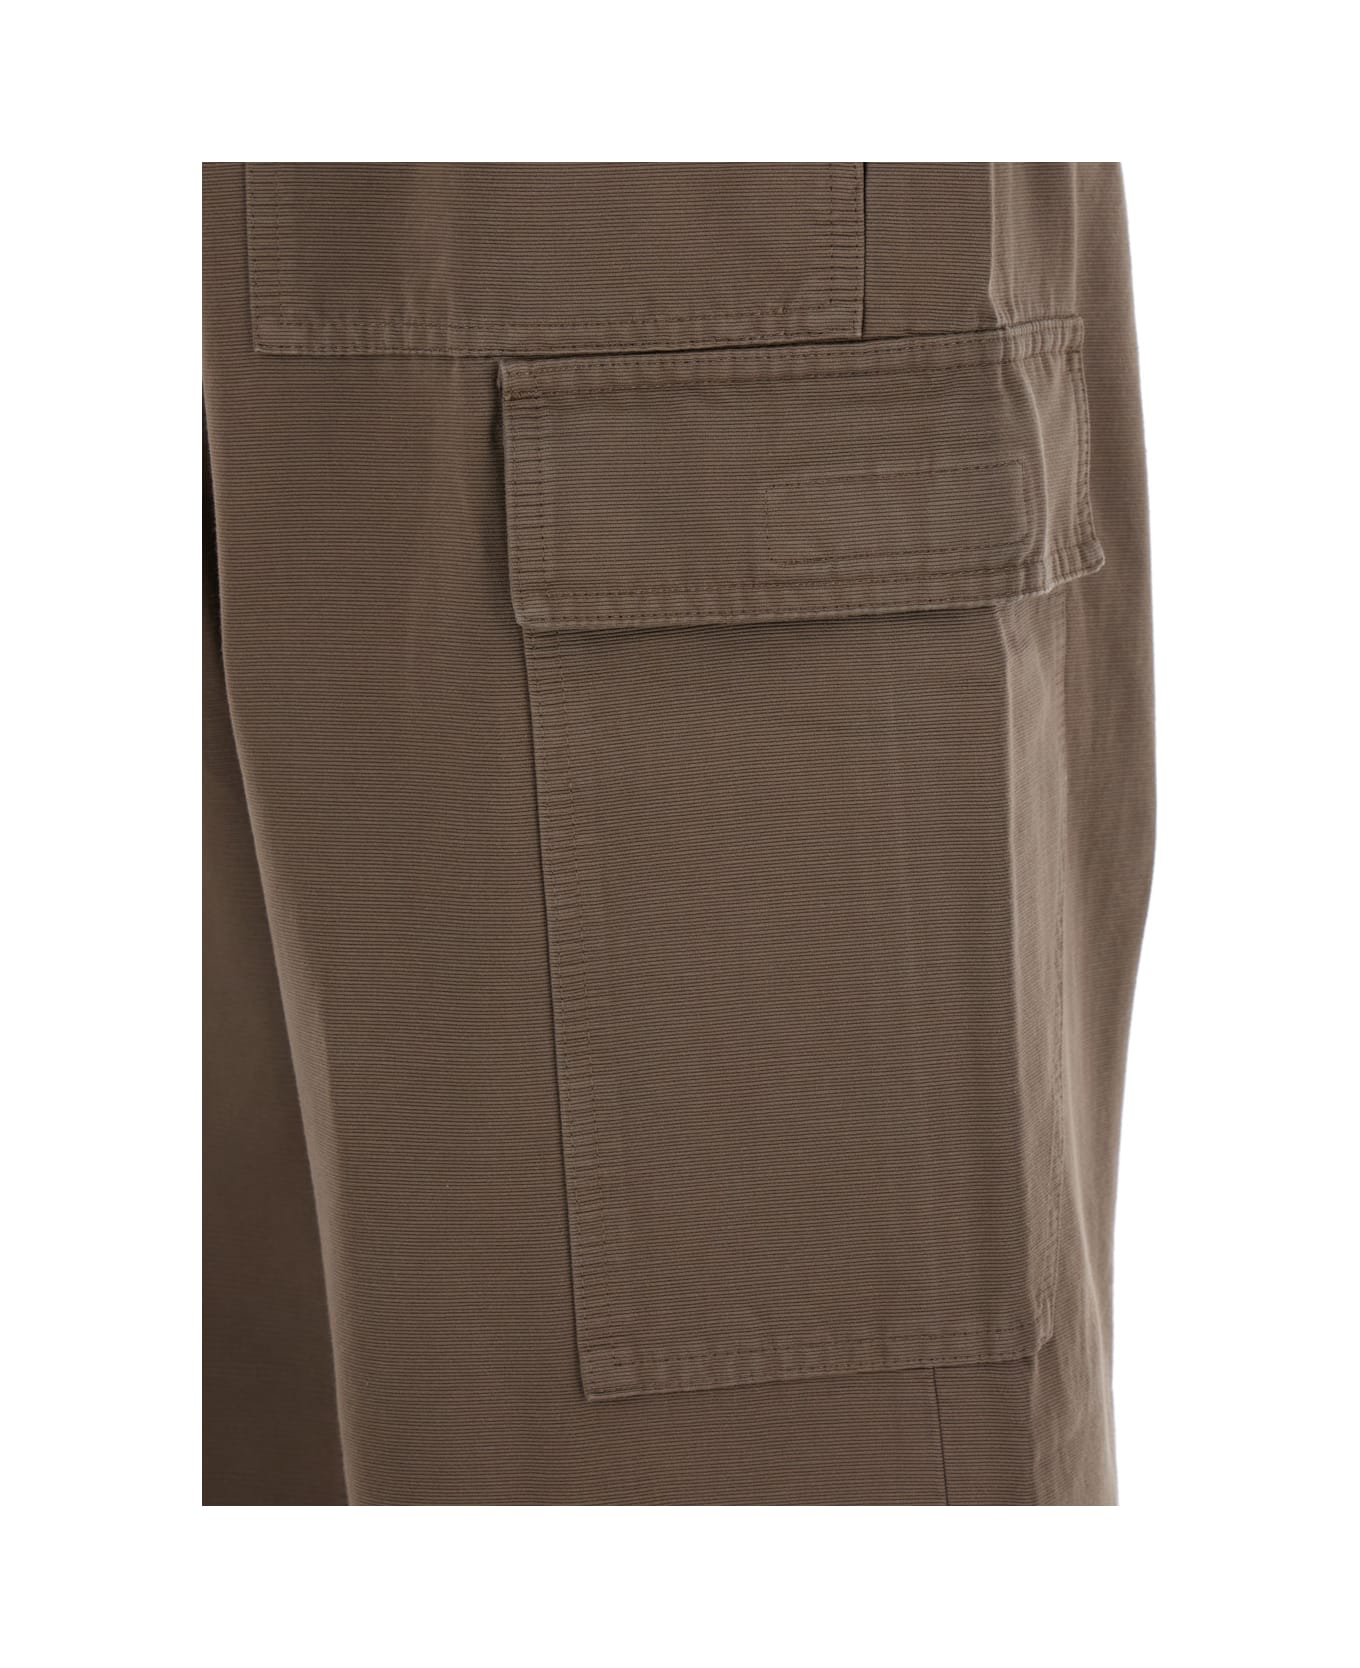 DRKSHDW Cotton Twill Cargo Trousers - Brown